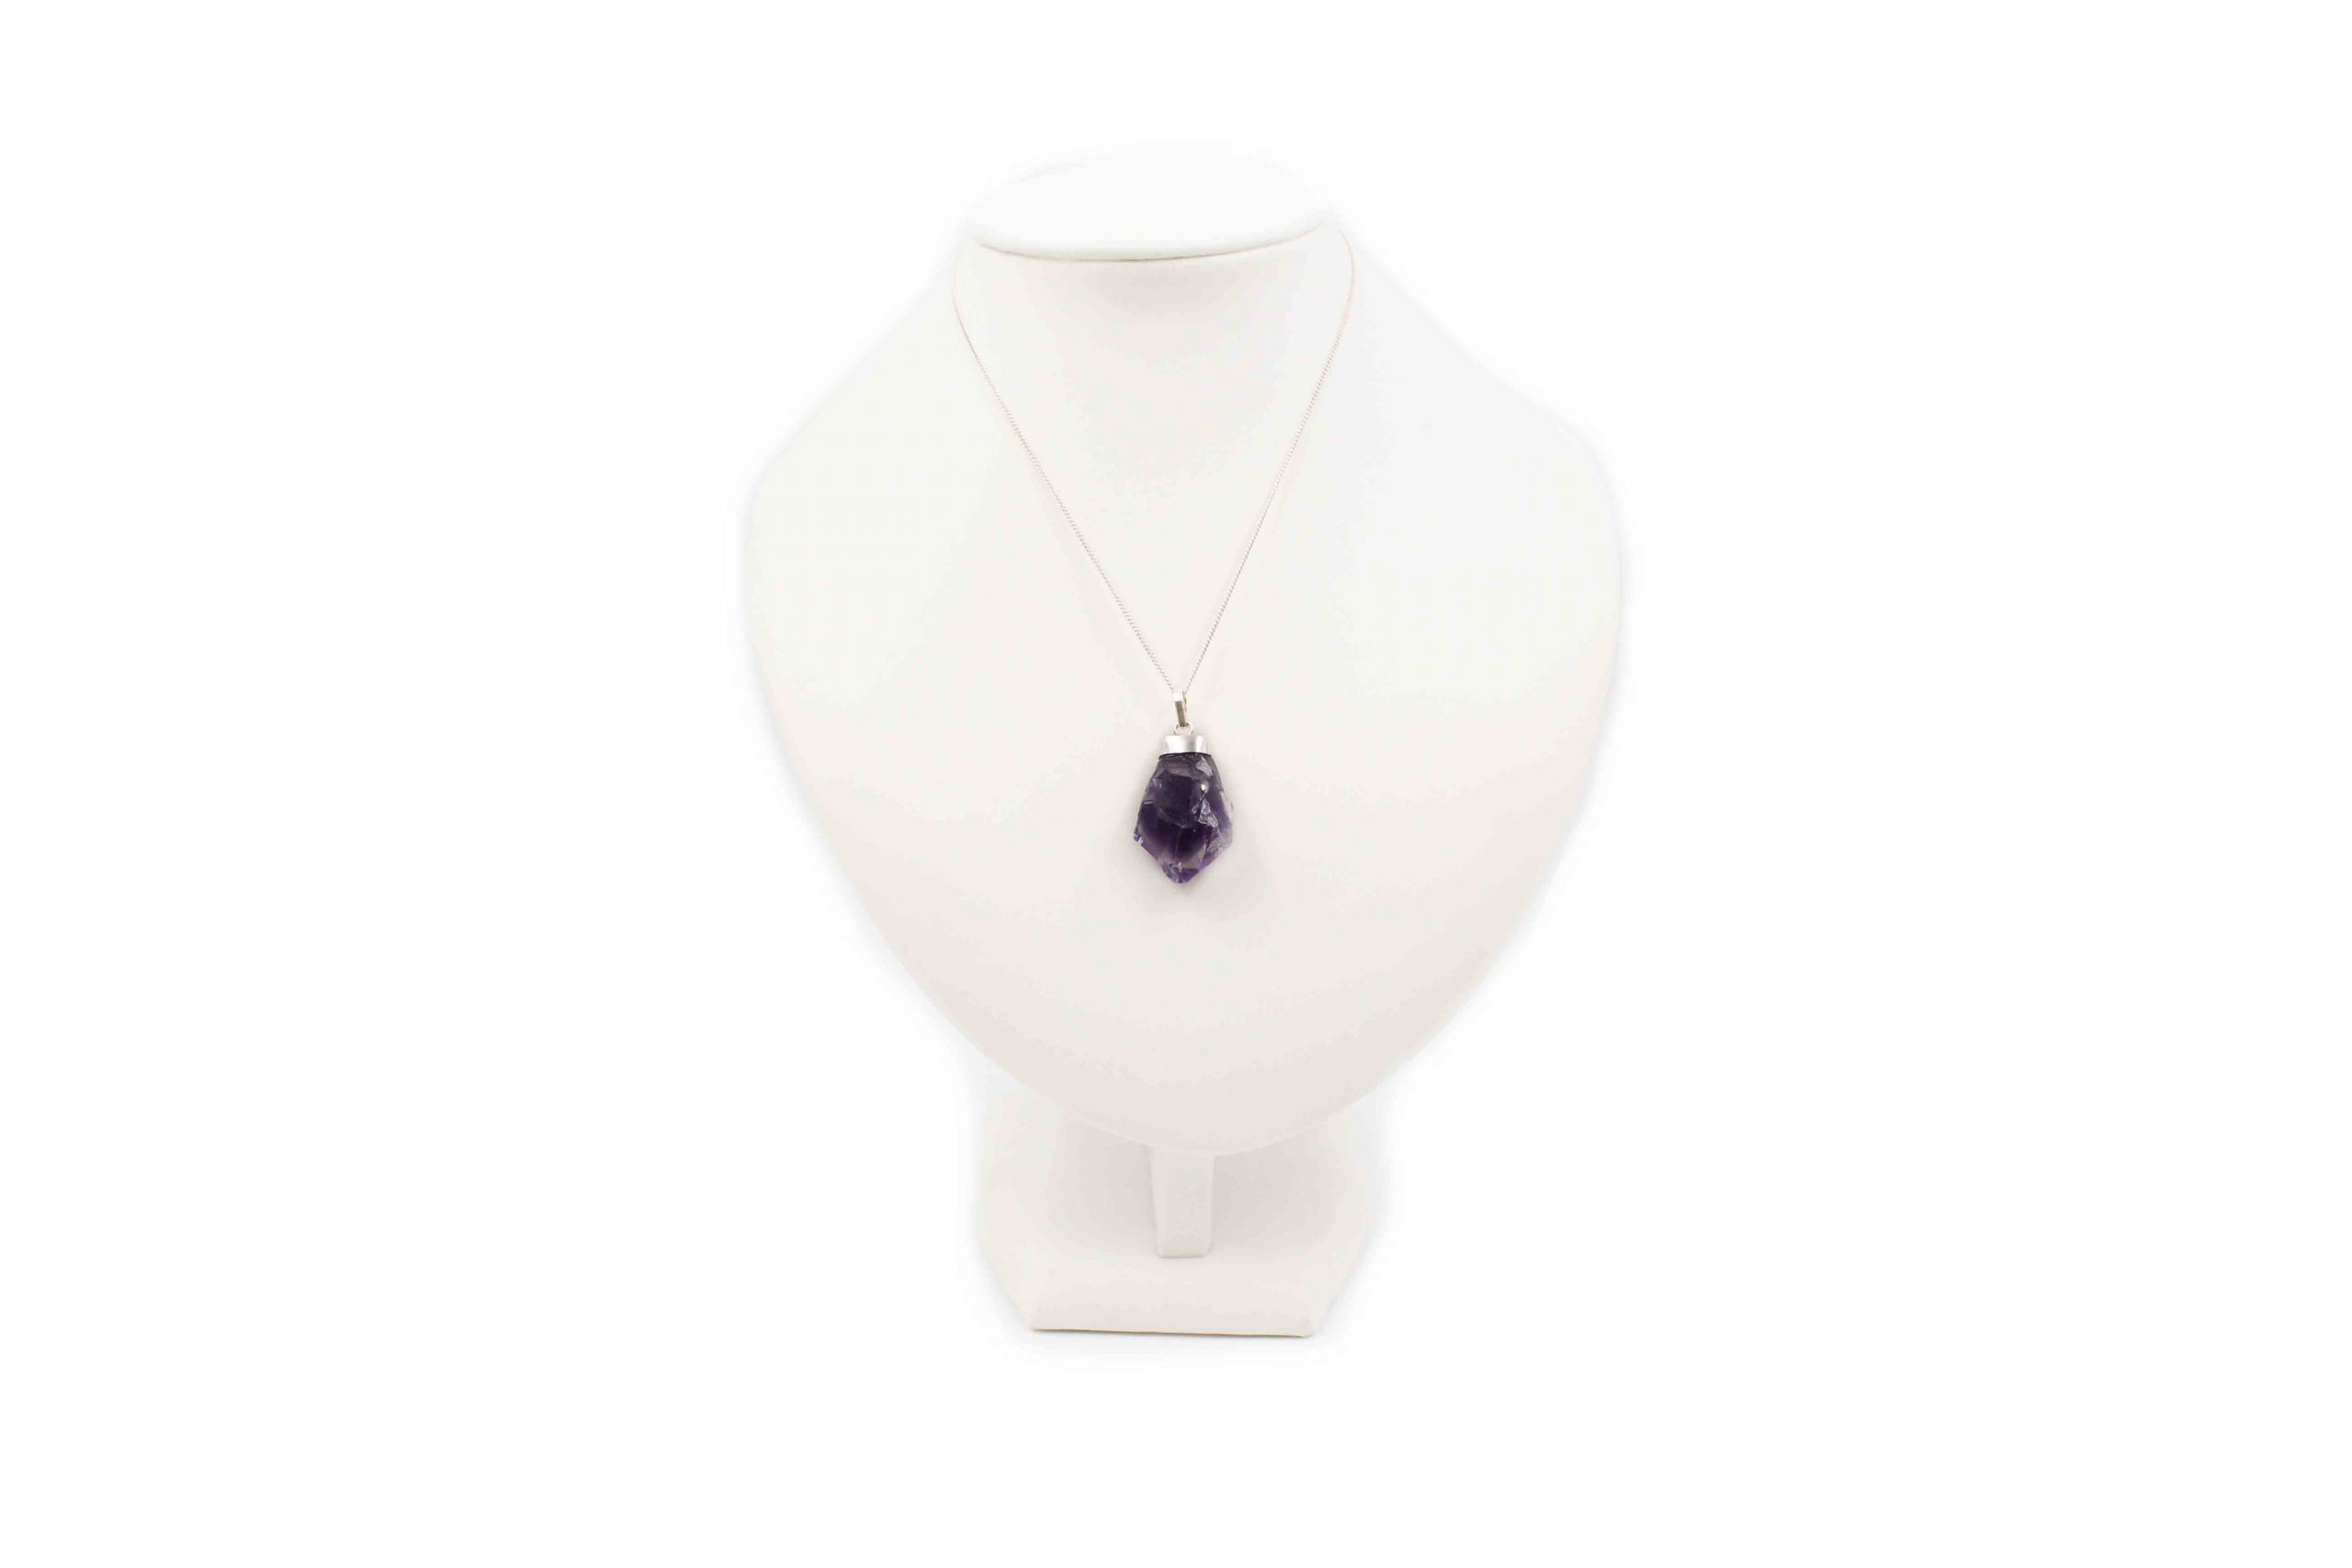 Amethyst "Rough Point" Pendant Sterling Silver- Crystal Dreams